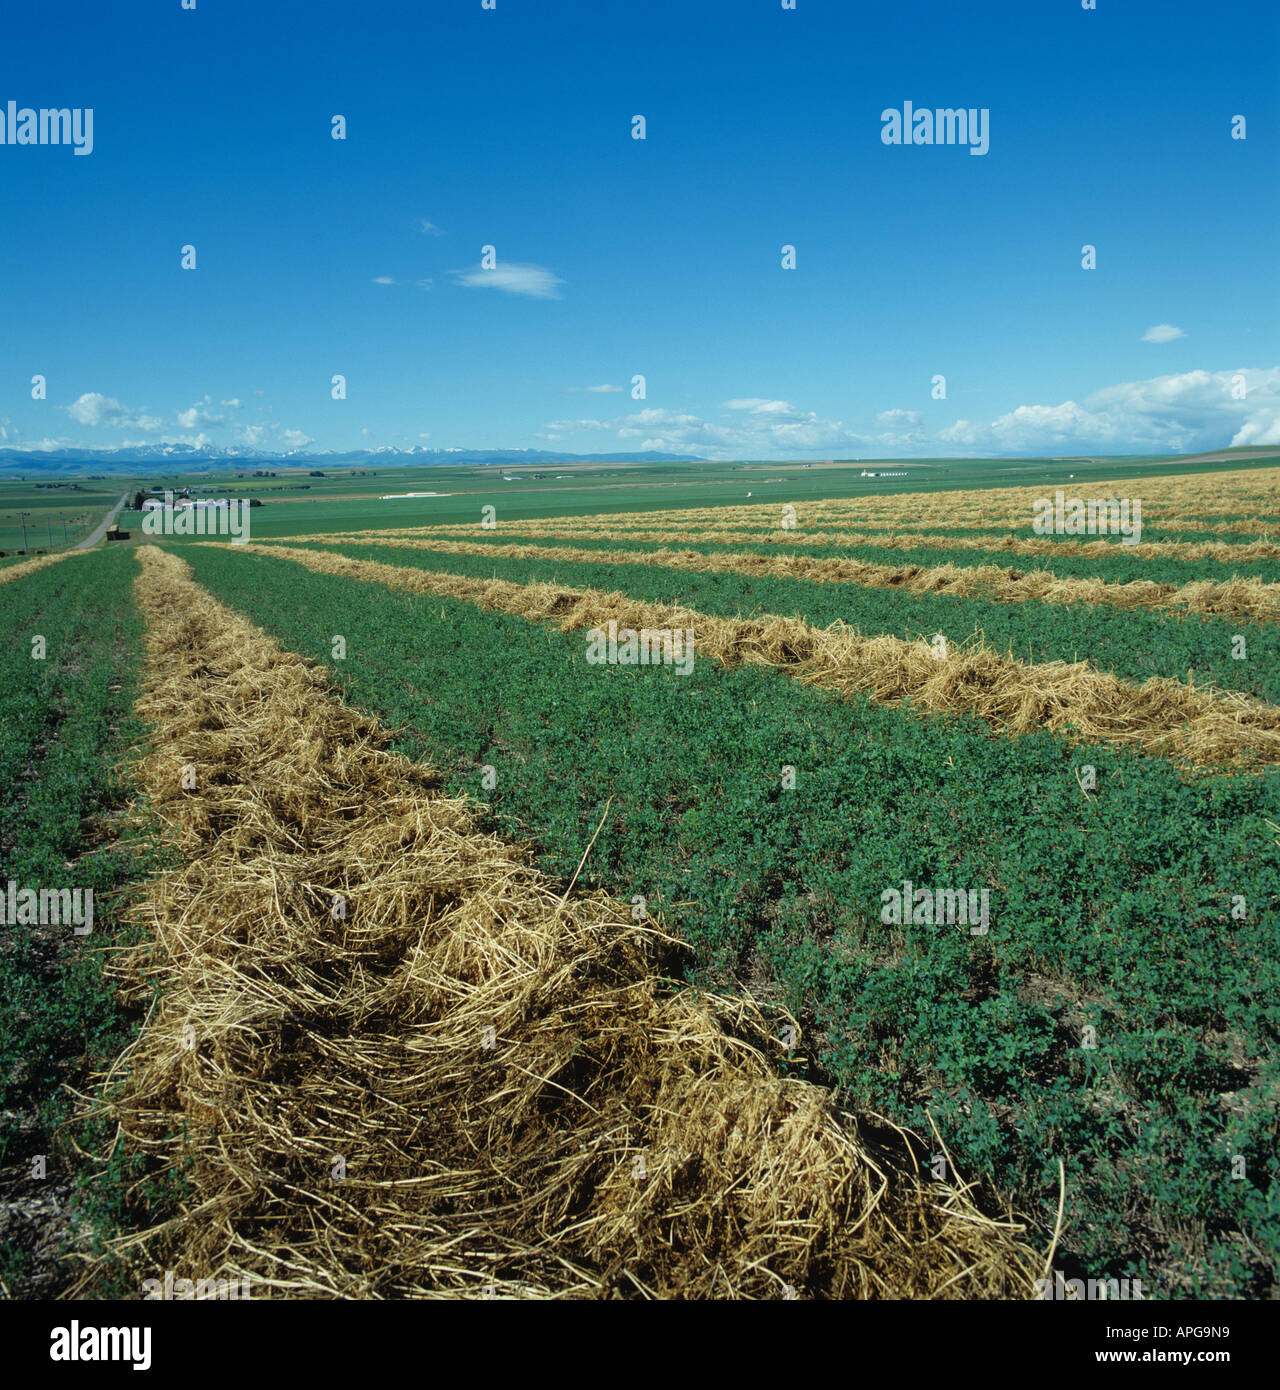 Cut alfalfa crop with swaths of alfalfa straw brown and ready for collection Montana USA Stock Photo